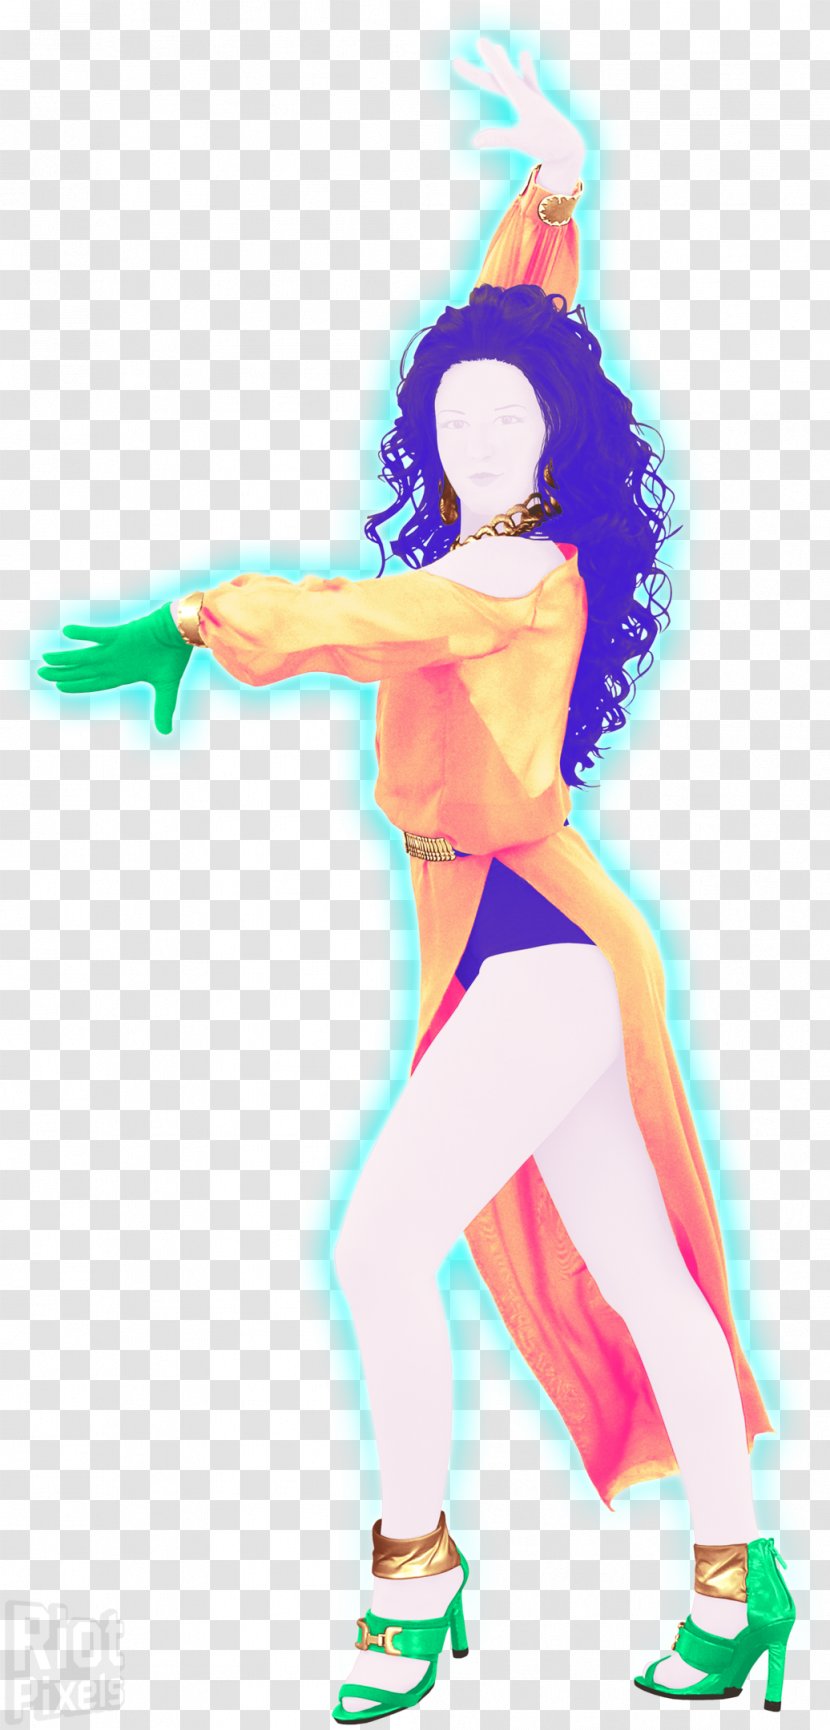 Just Dance 2016 Now Wii Walk The Moon - Flower - Silhouette Transparent PNG